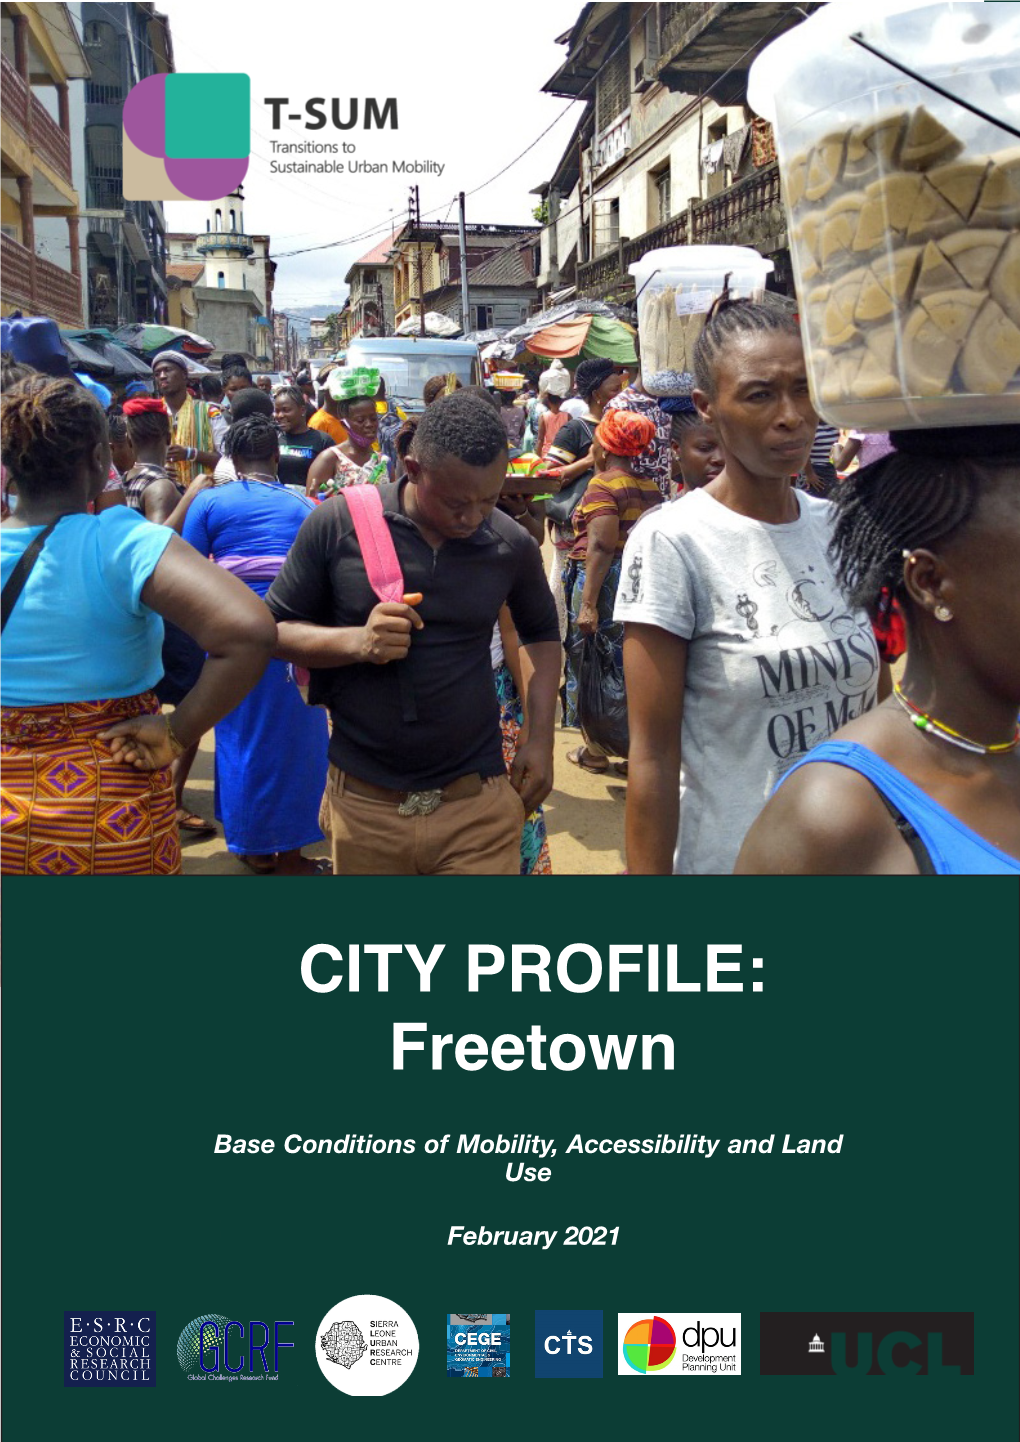 City Profile Freetown, Base Conditions of Mobility, Accessibility and Land Use